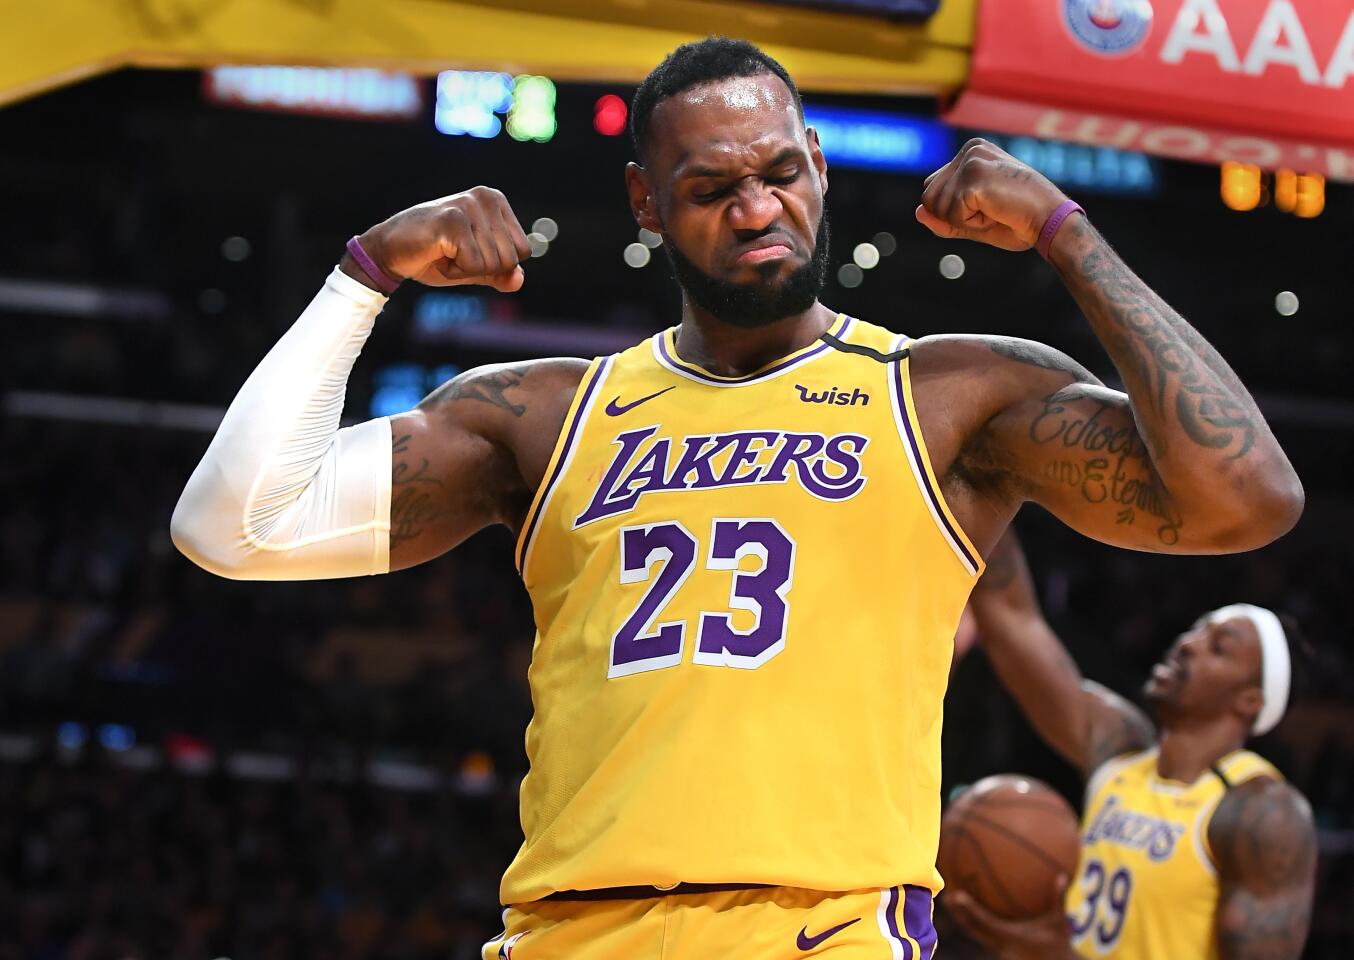 LeBron James celebrates after getting a basket and a foul during a game against the Knicks on Jan. 7 at Staples Center.